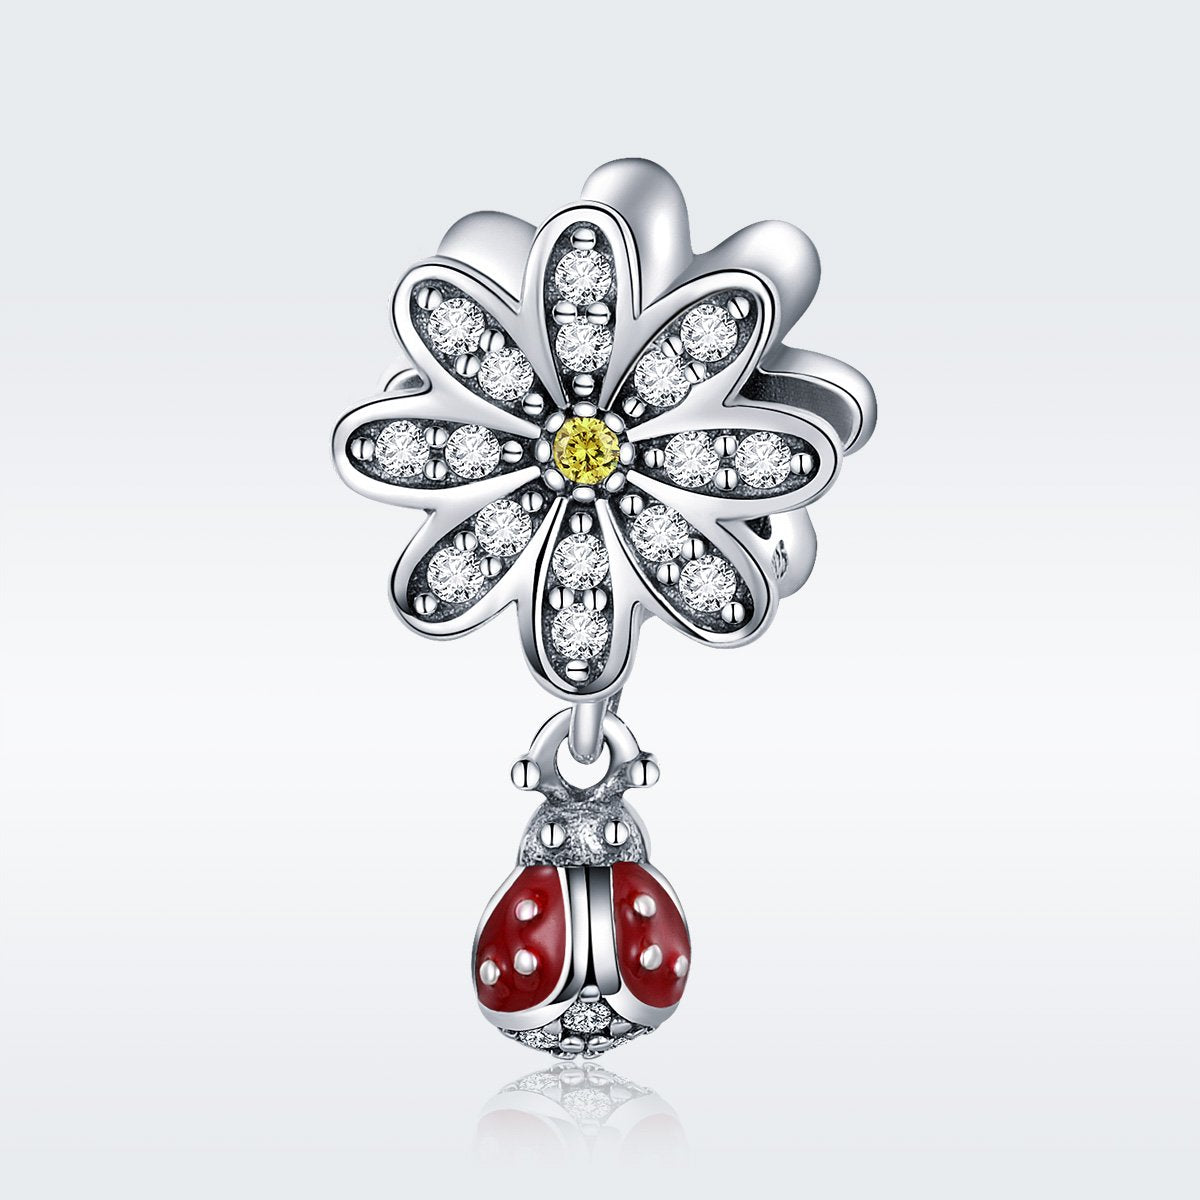 Sterling 925 silver charm the ladybug and flower fits Pandora charm and European charm bracelet Xaxe.com